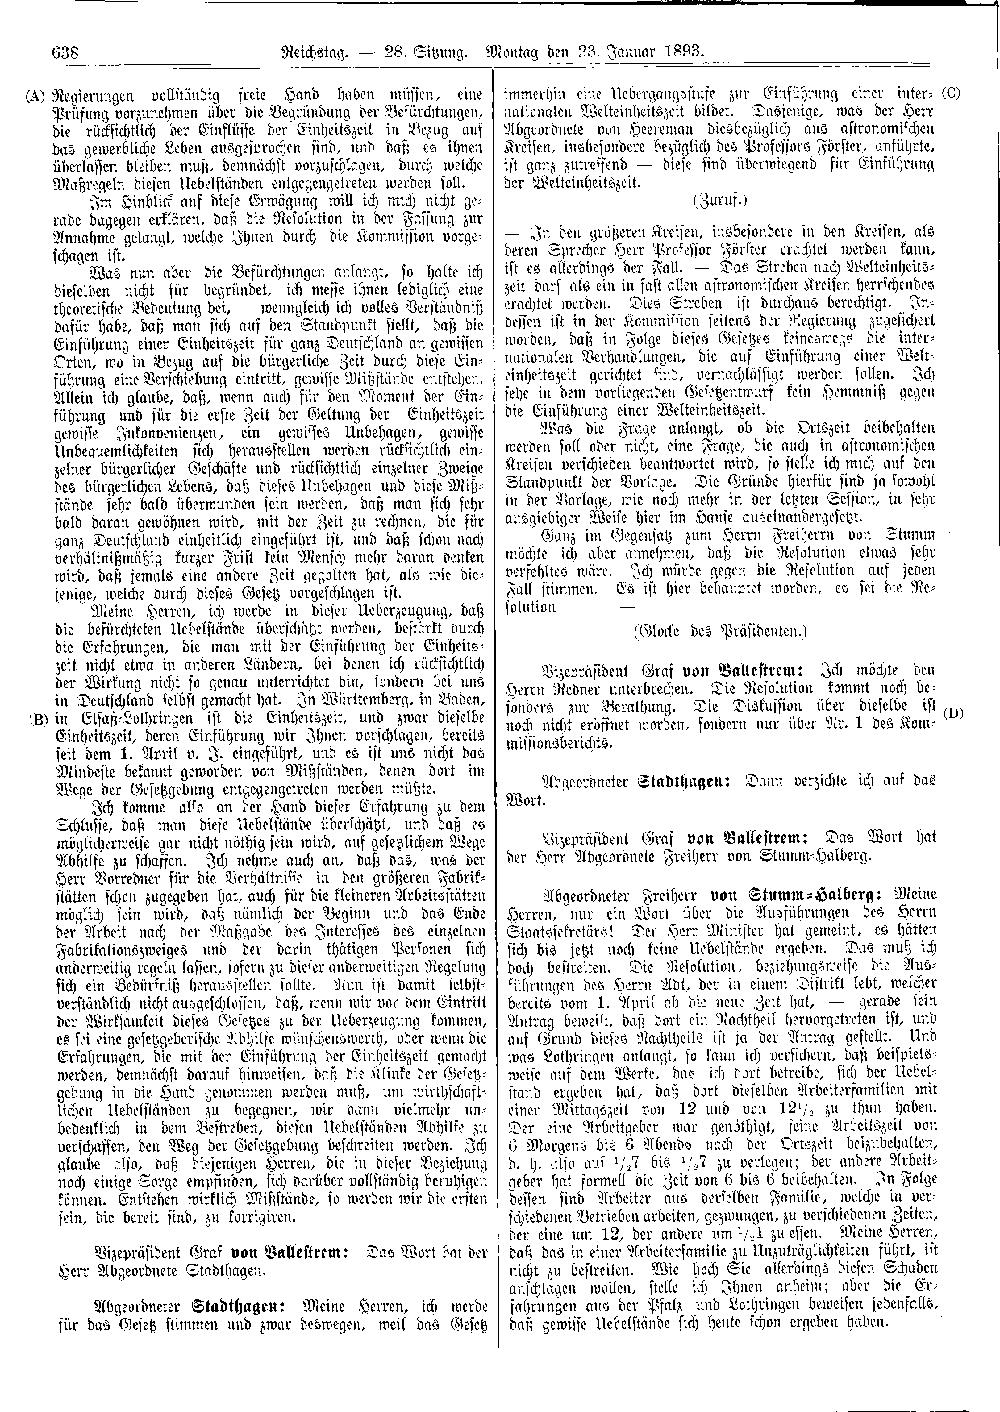 Scan of page 638